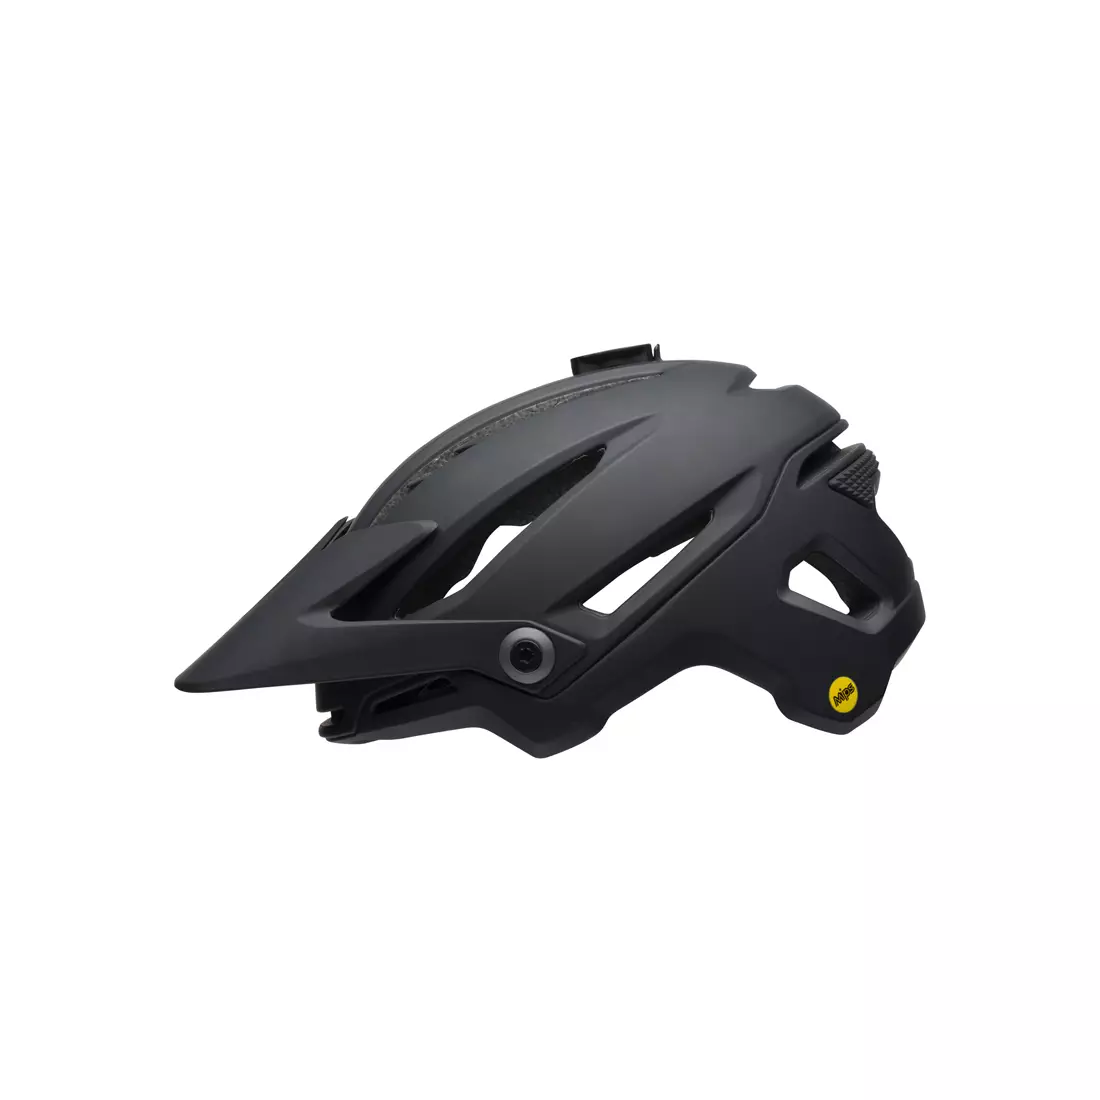 BELL kask rowerowy mtb SIXER INTEGRATED MIPS, matte black 